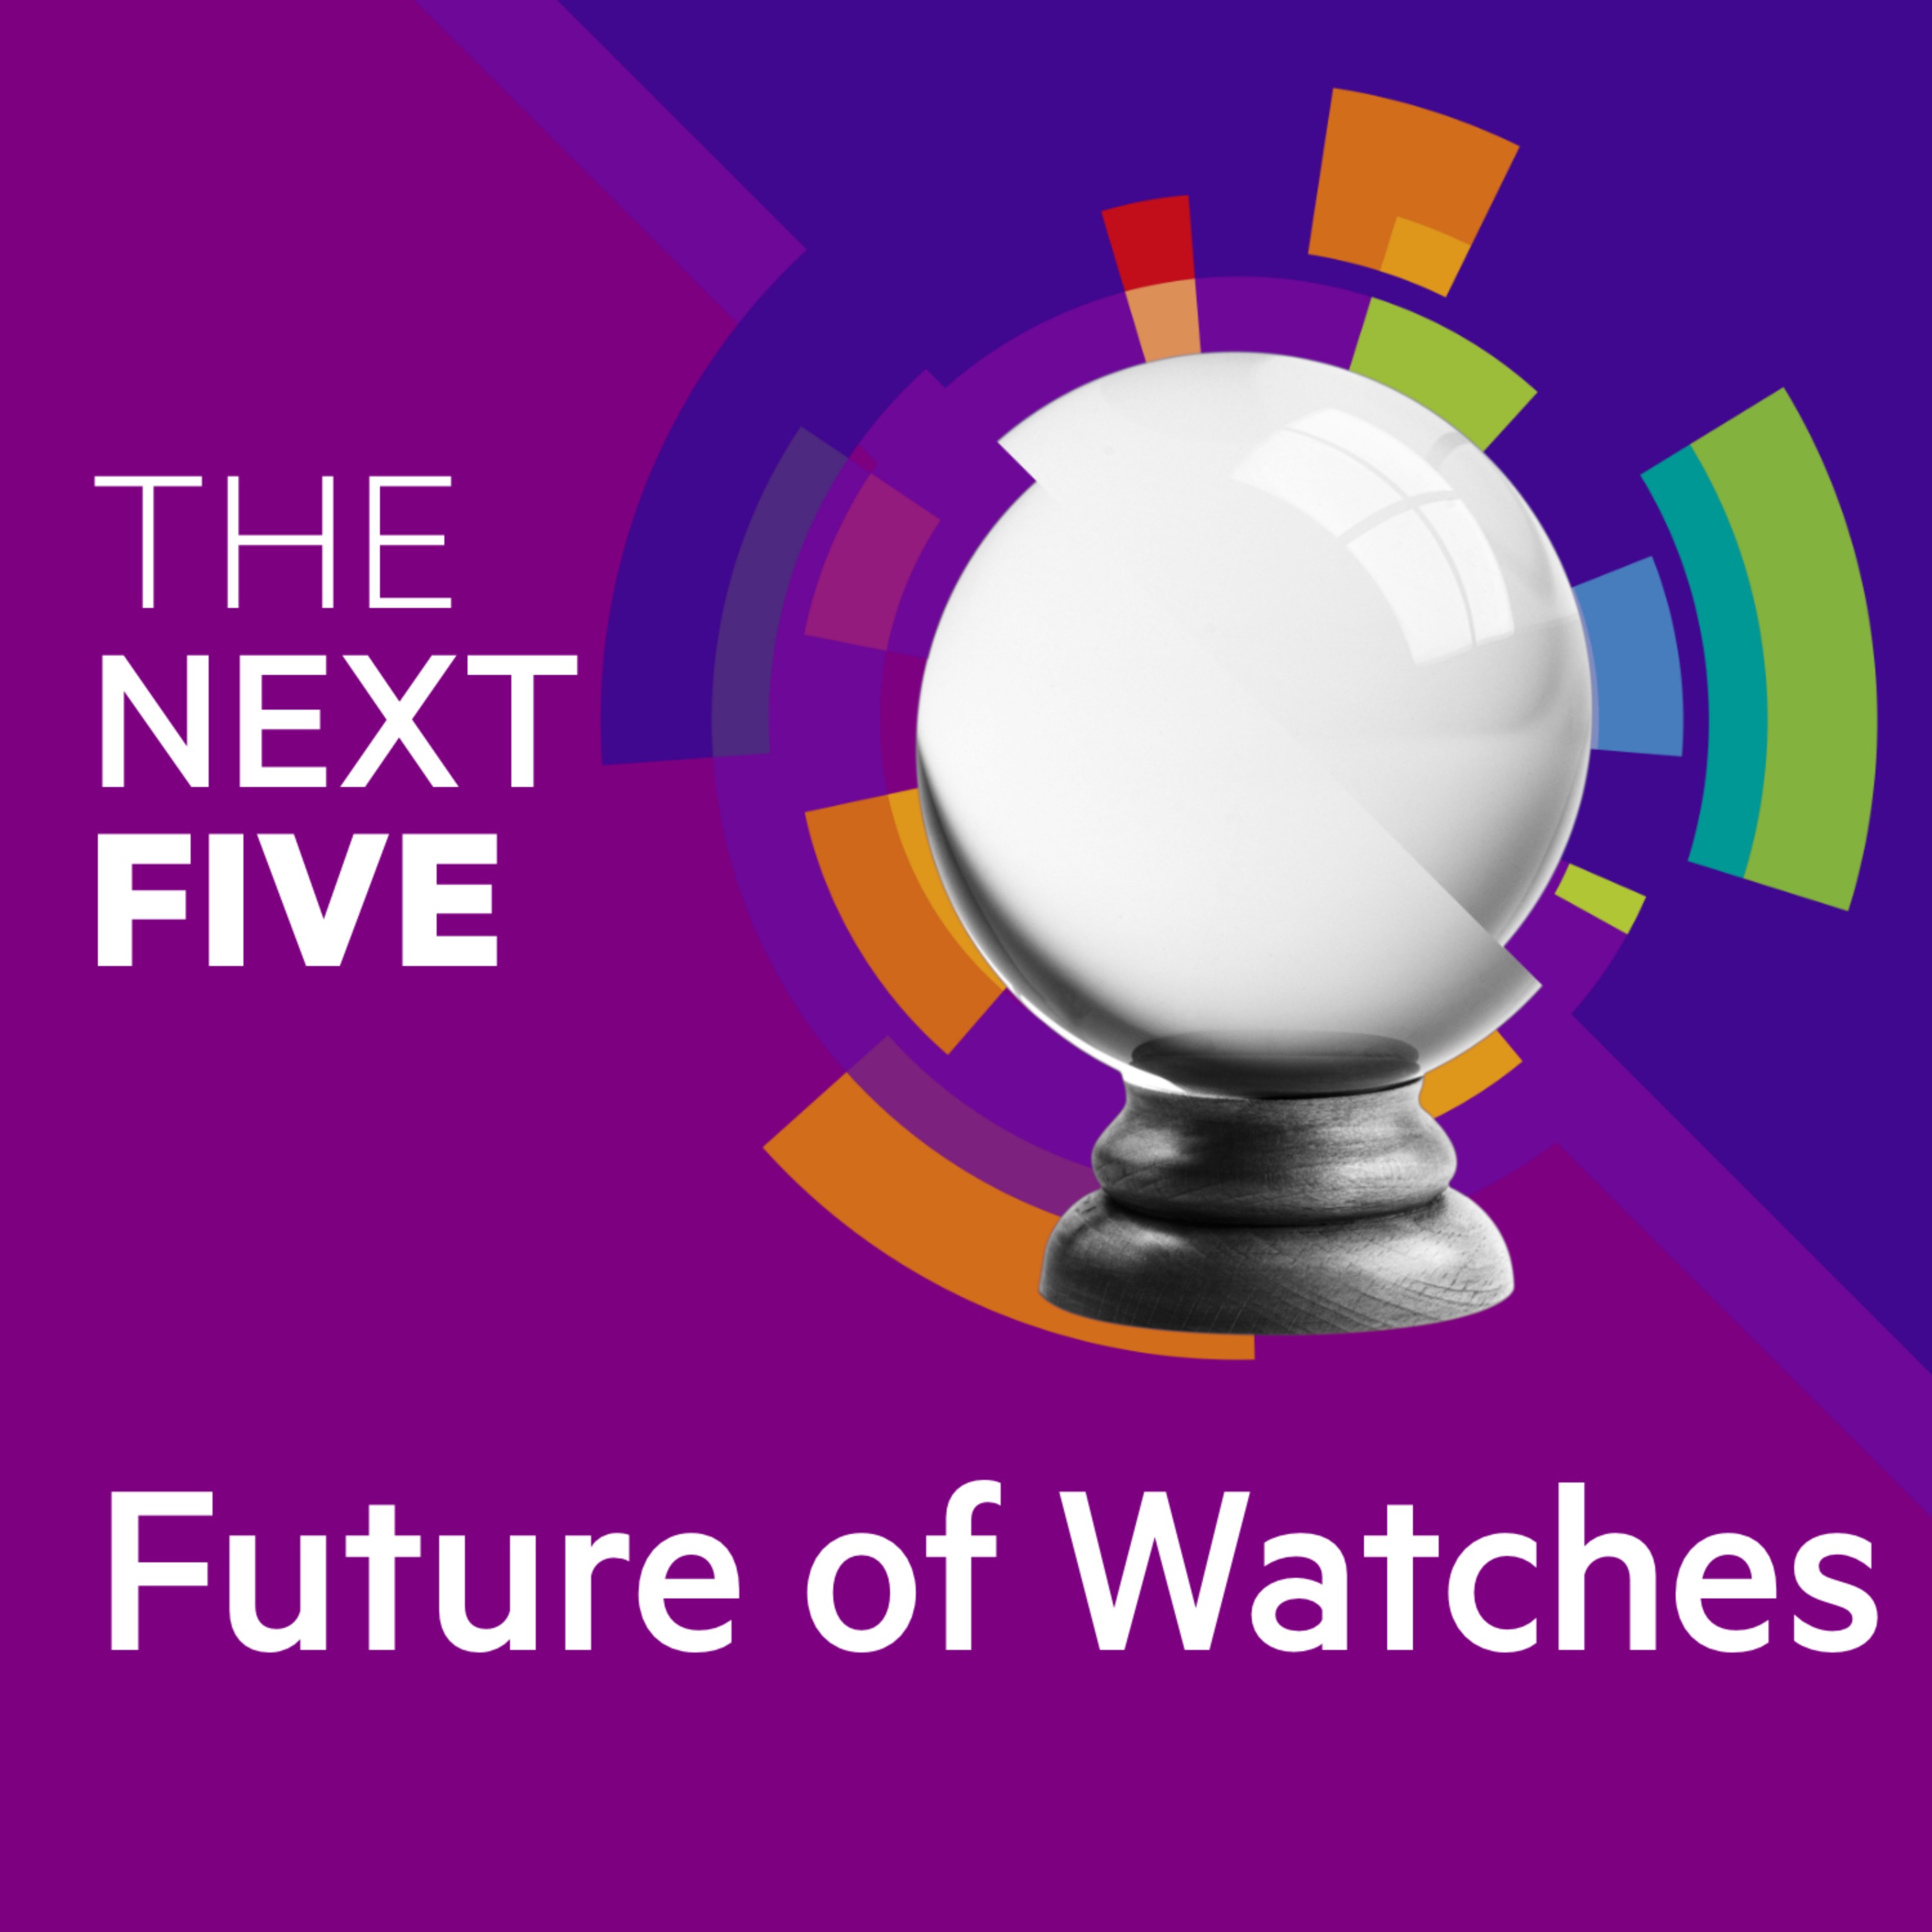 It’s About Time: The Future of Watches